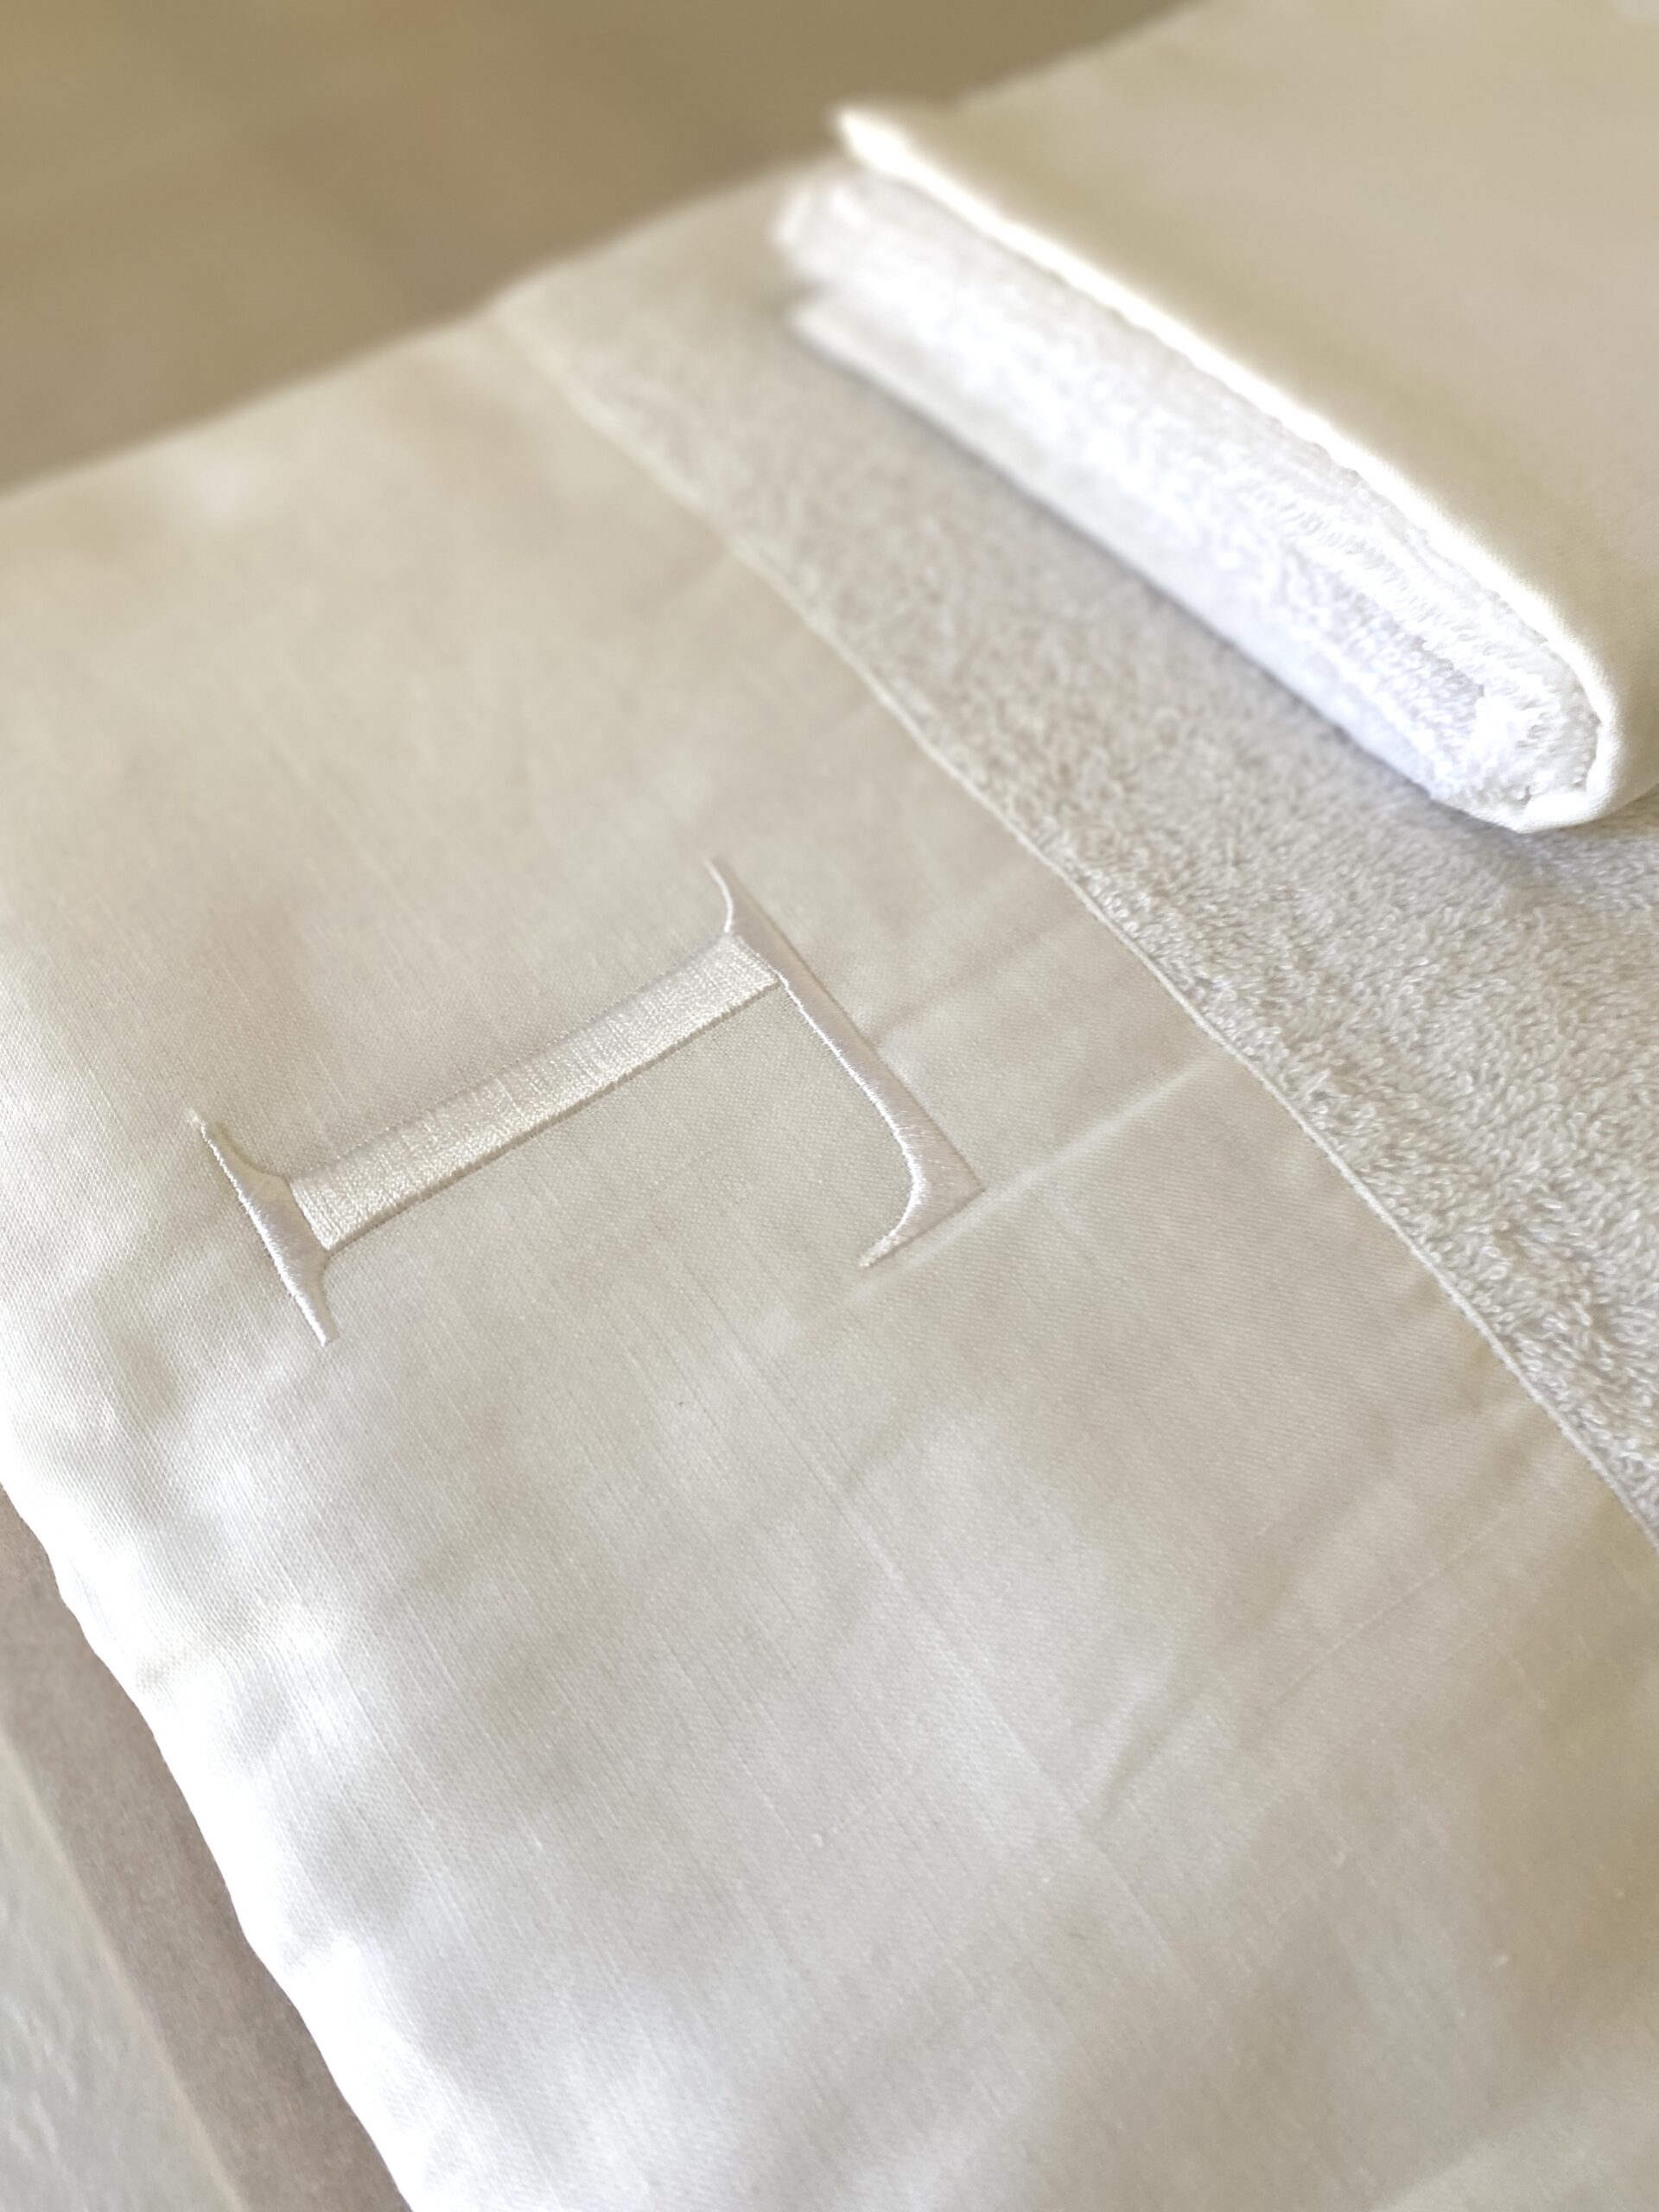 harmony-of-dawn-baptism-twins-ladoset-towels-with-embroidered-initial